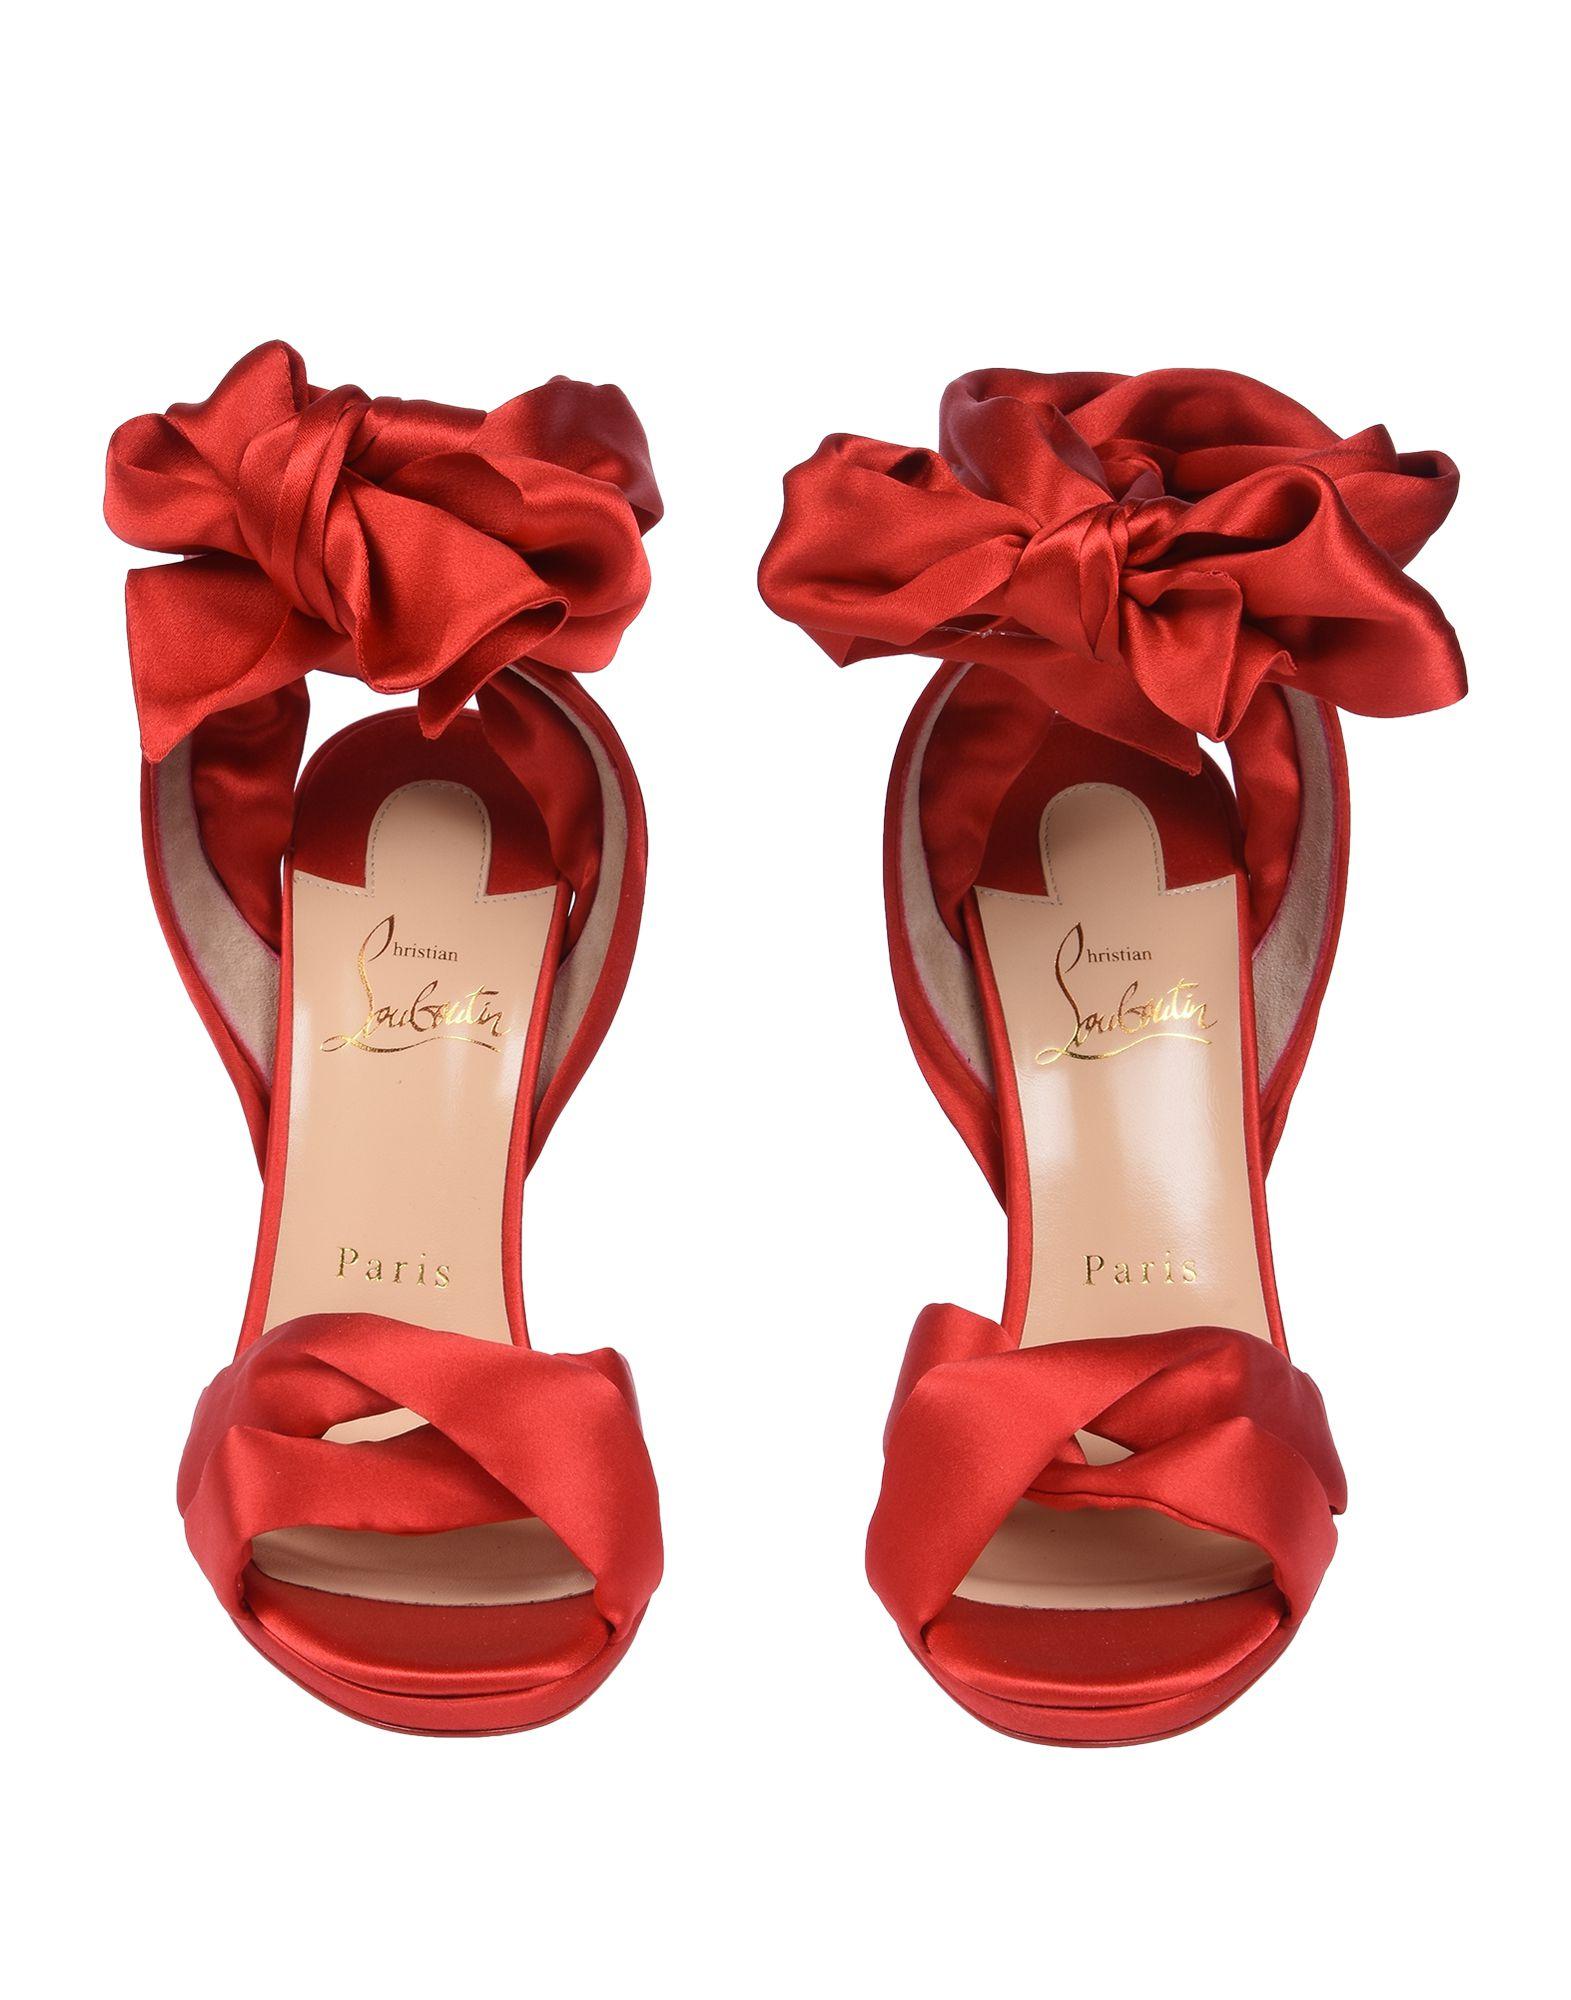 Christian Louboutin NEW Red Satin Bow Evening Sandals Pumps Heels in Box

Size IT 36
Satin
Ankle tie closure
Made in Italy
Heel height 4.75